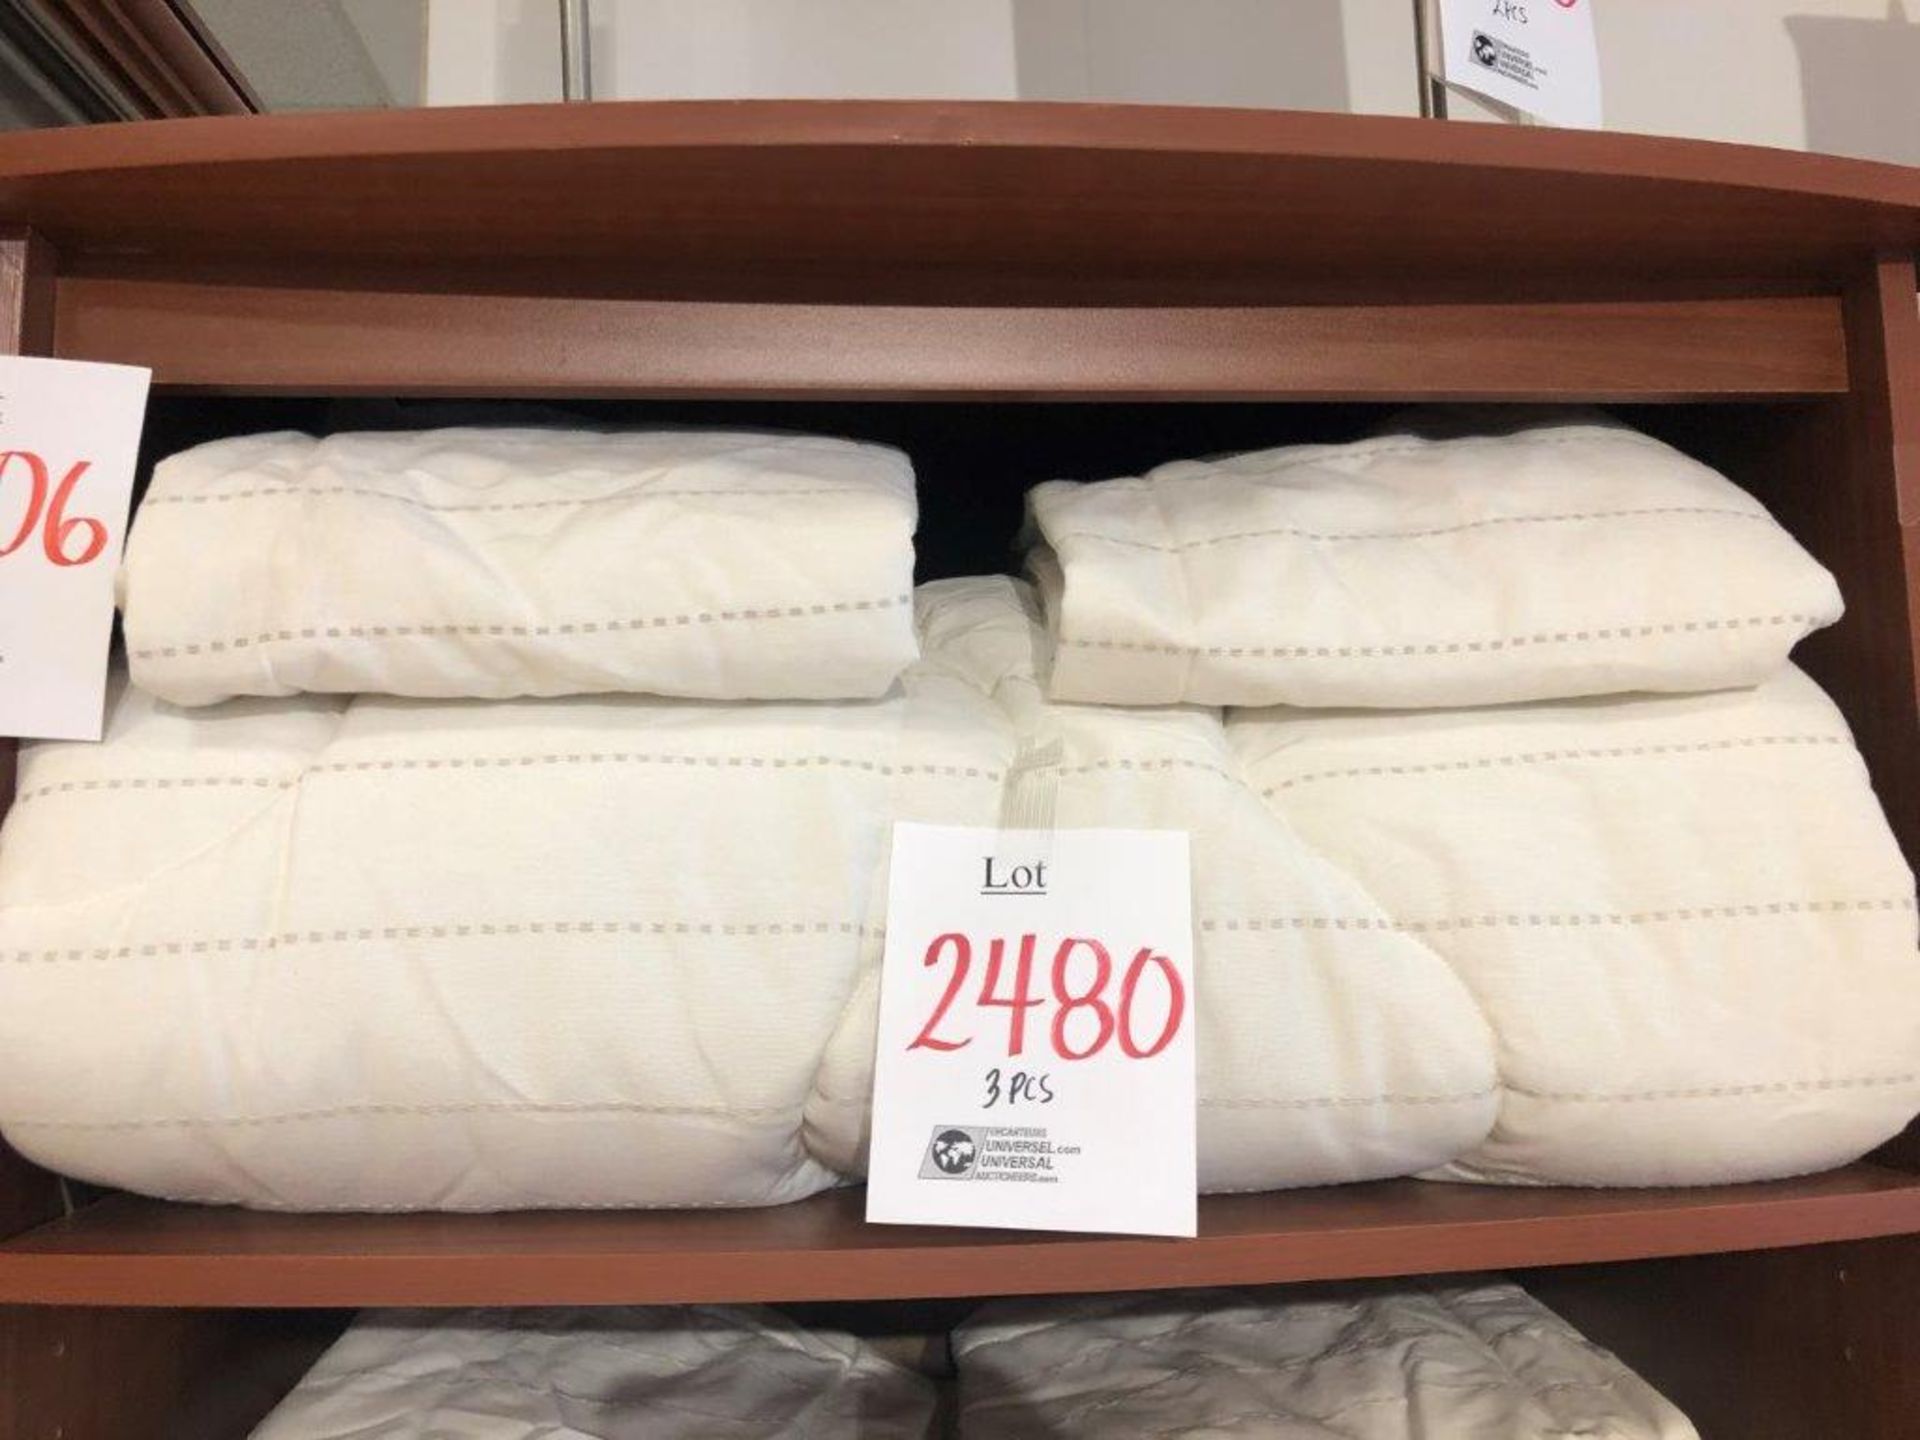 Queen Comforter with 2 pillow cases white 3 pcs (Lot)